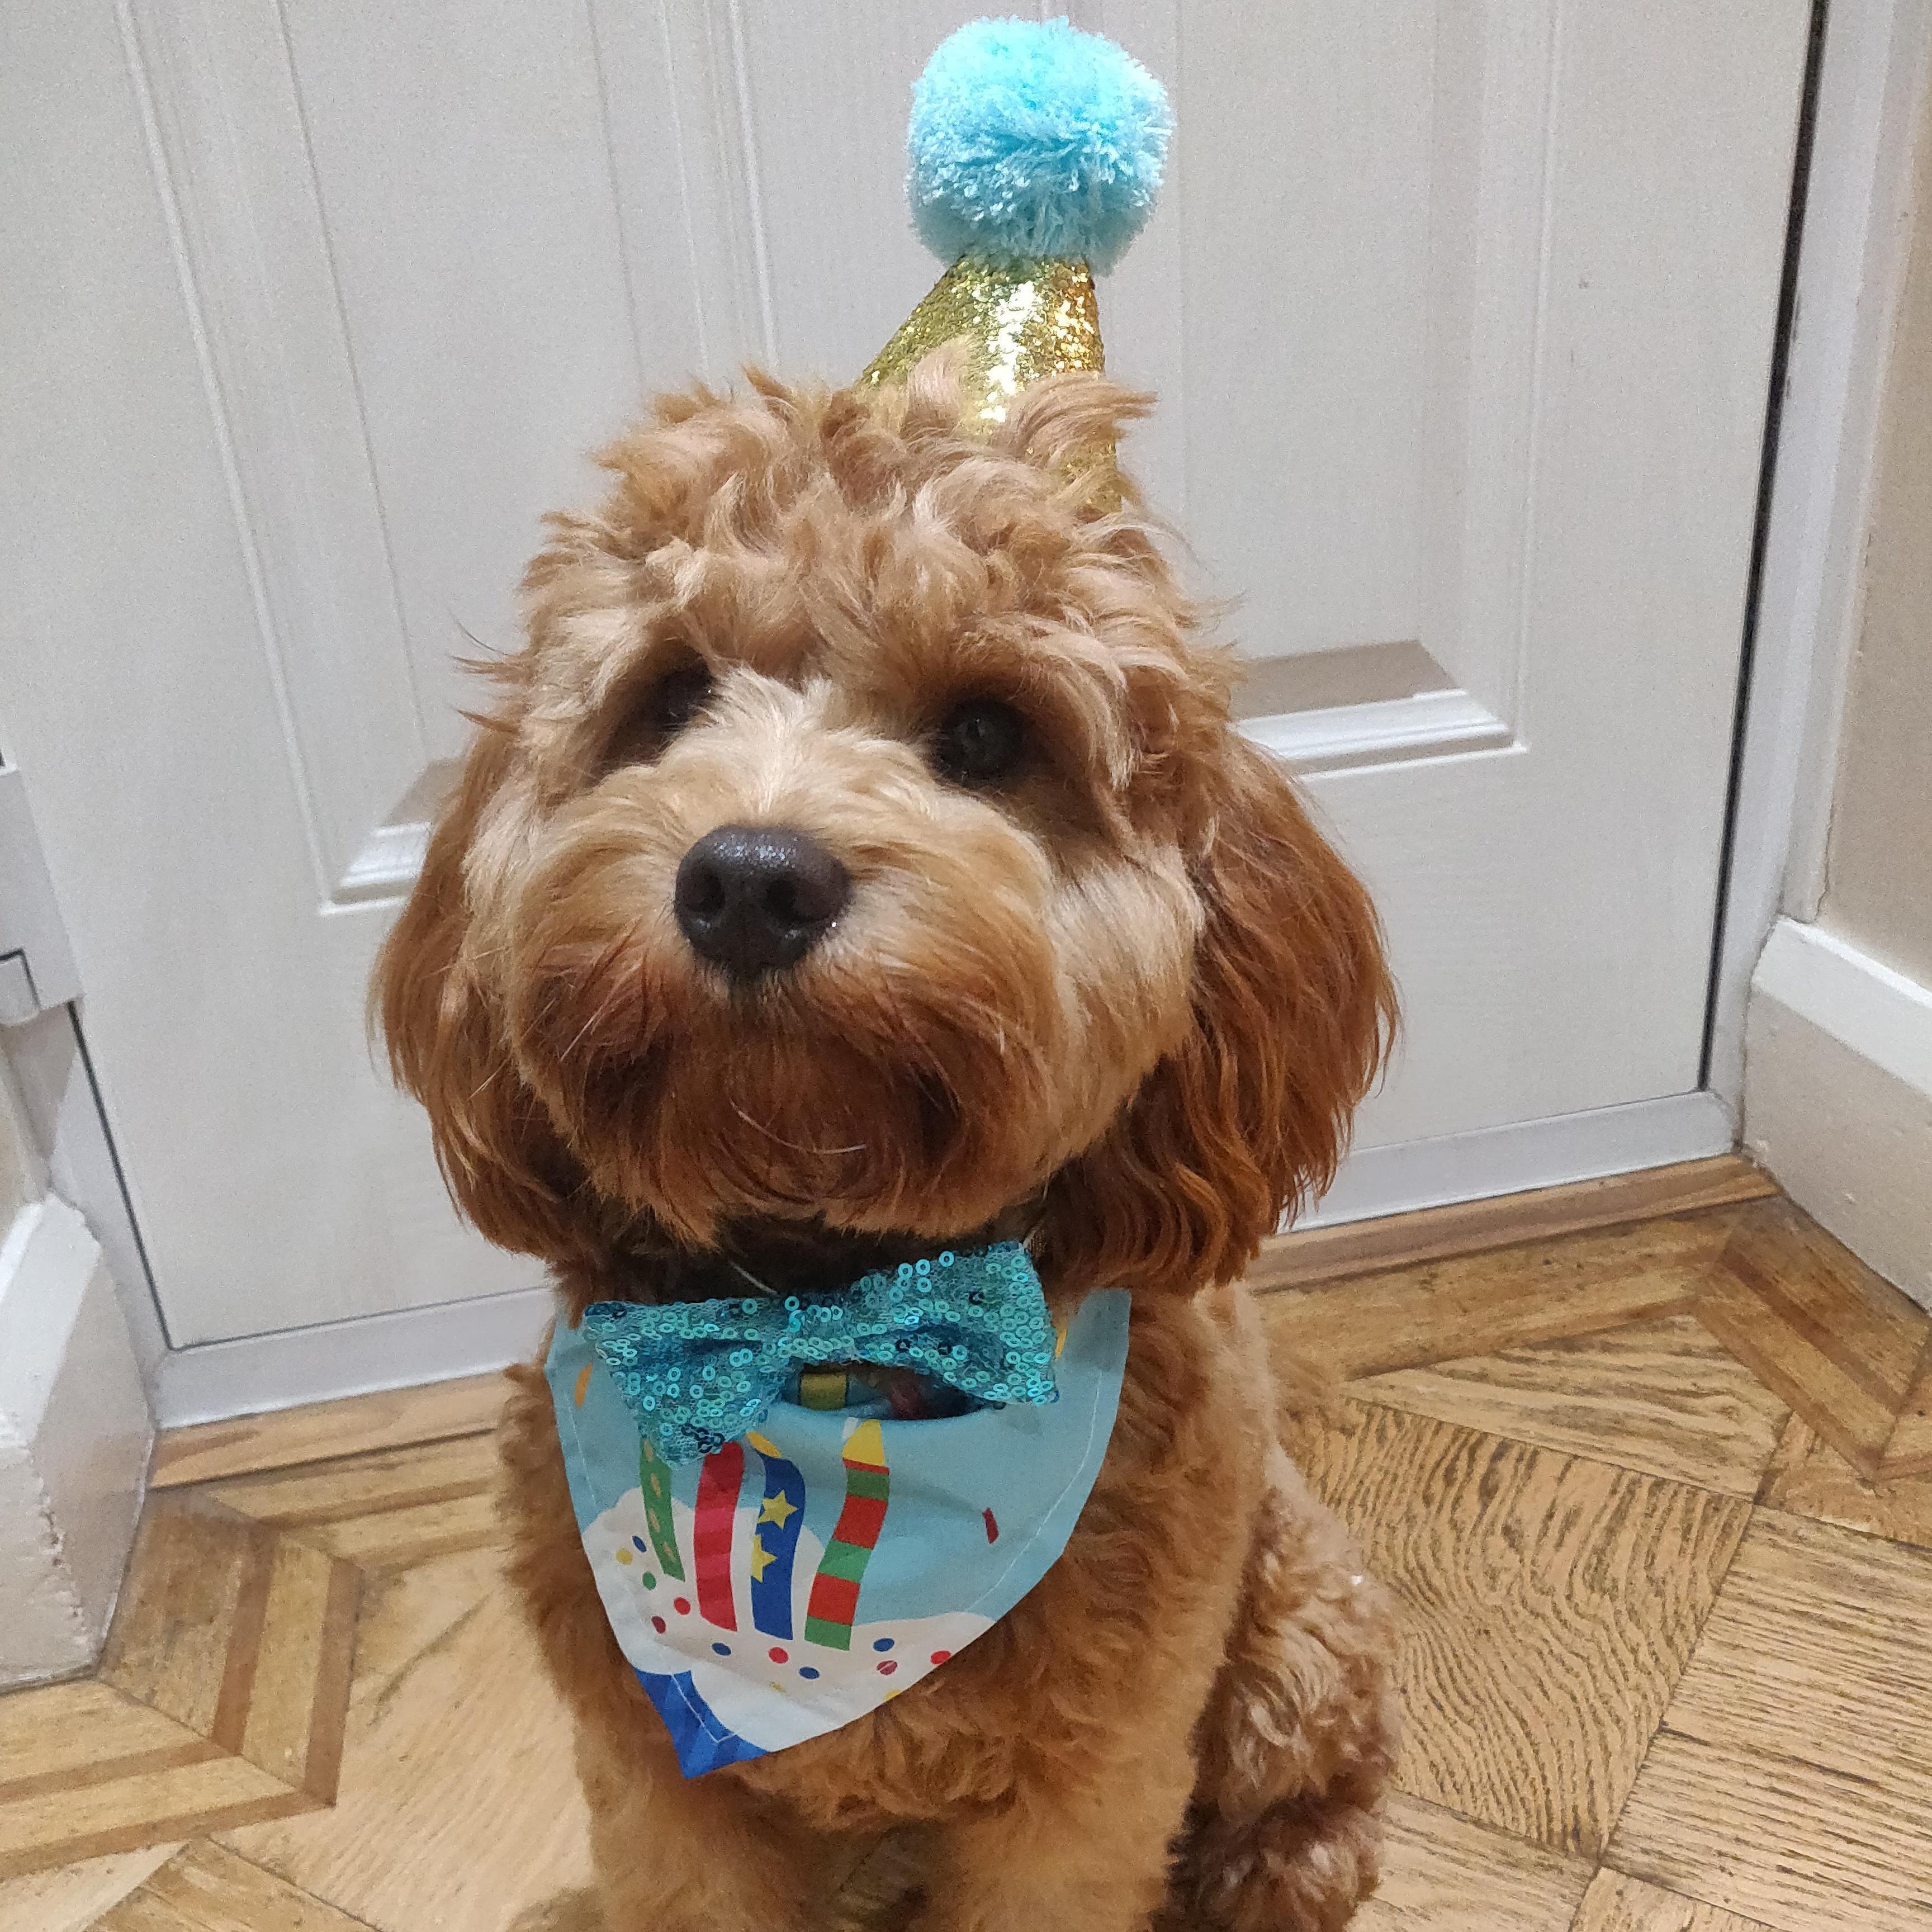 Cavachon wearing a party hat and bib